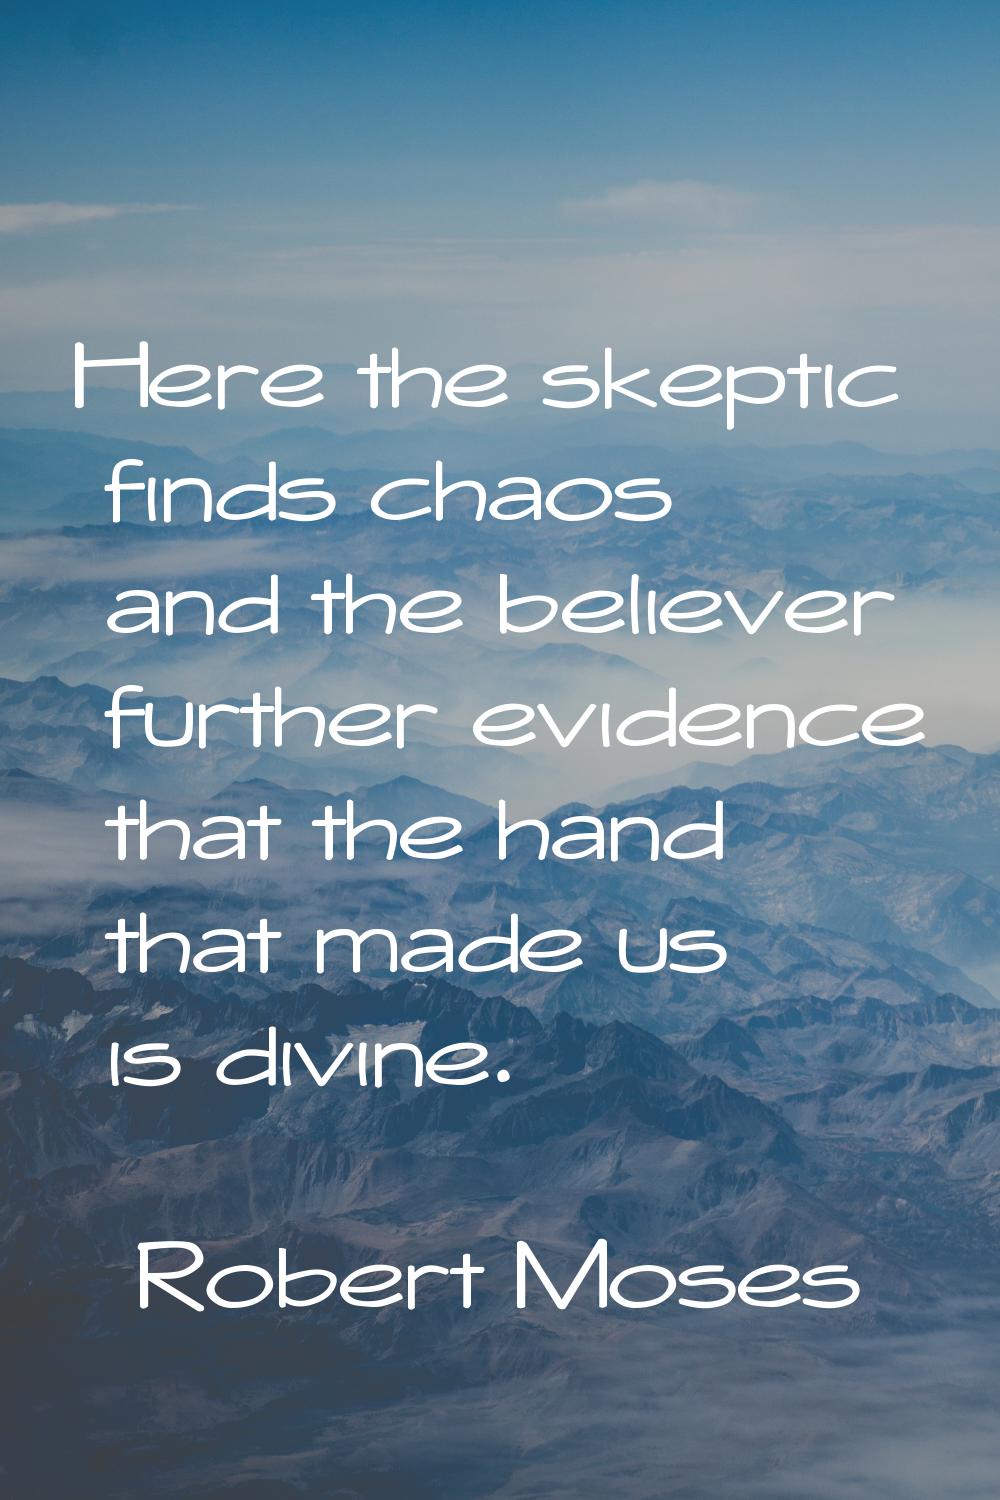 Here the skeptic finds chaos and the believer further evidence that the hand that made us is divine